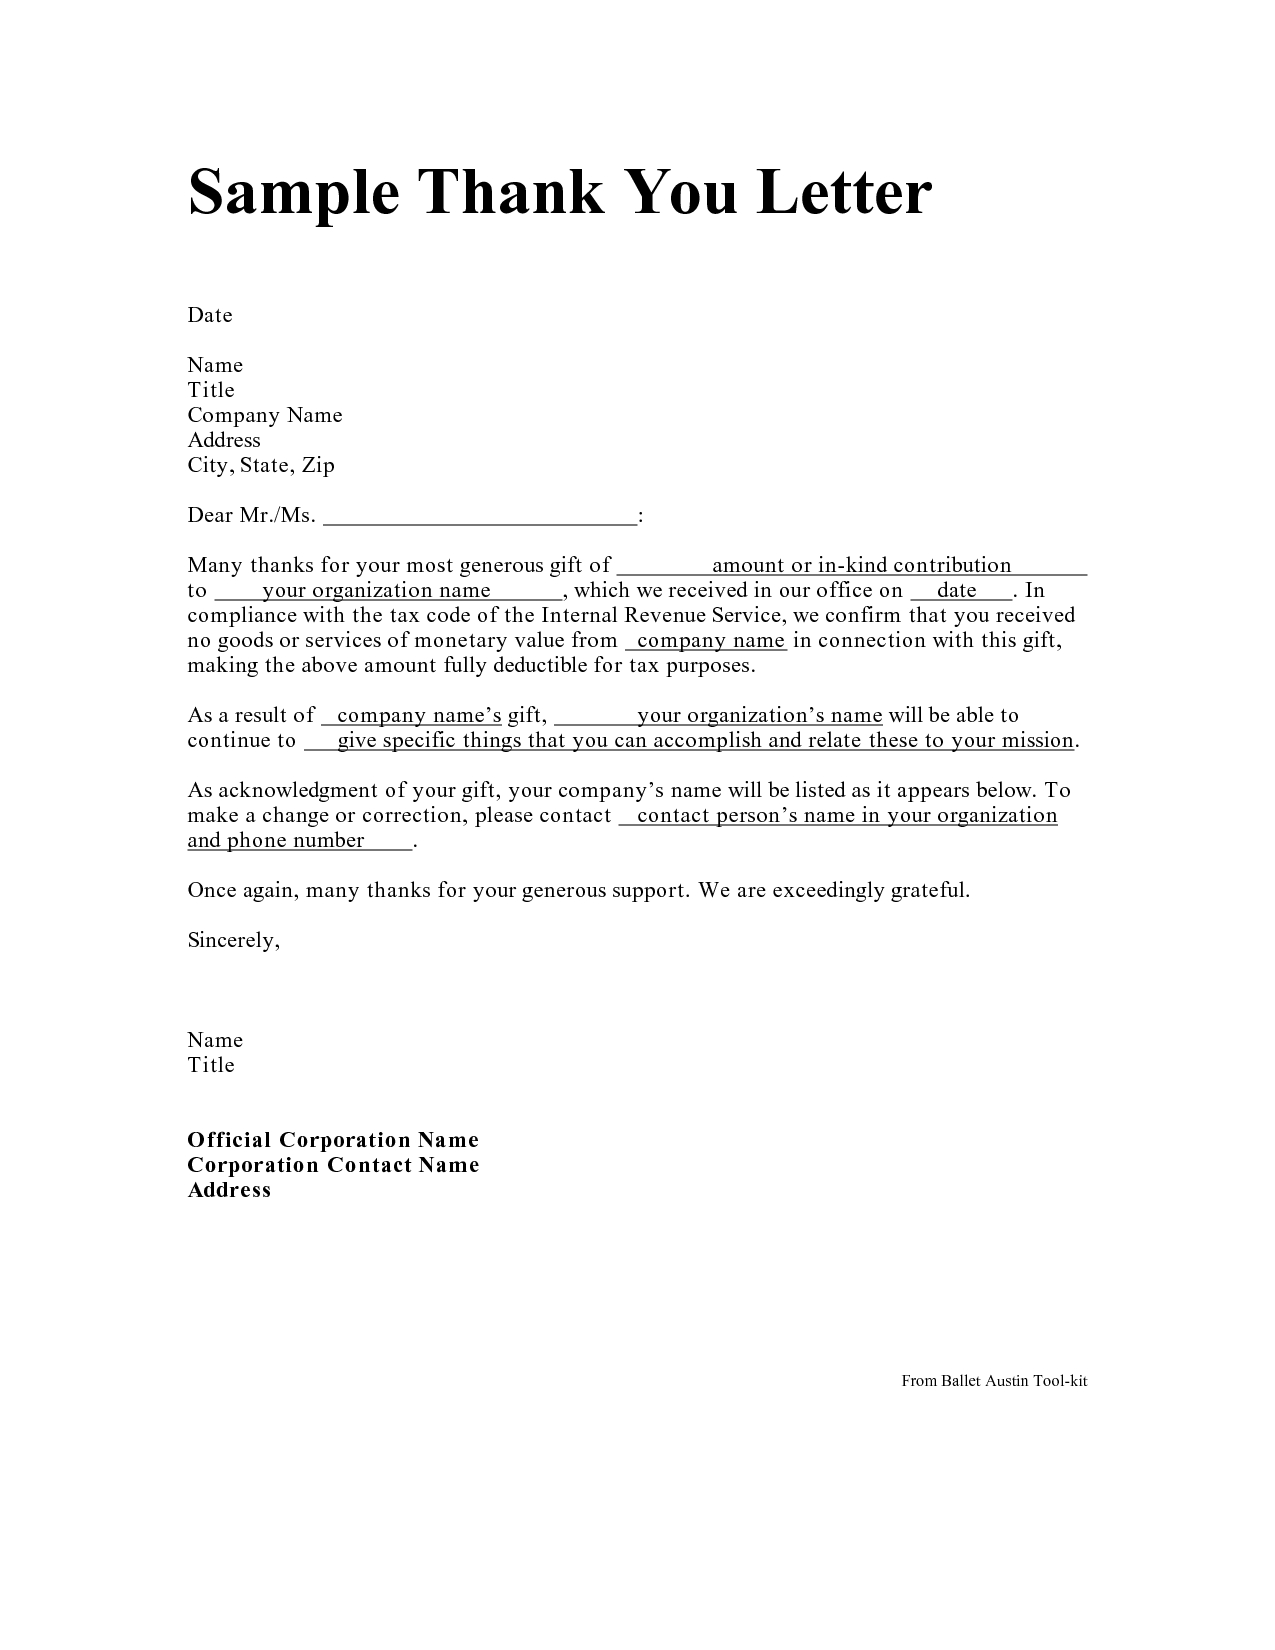 Reach Compliance Letter Template - Personal Thank You Letter Personal Thank You Letter Samples